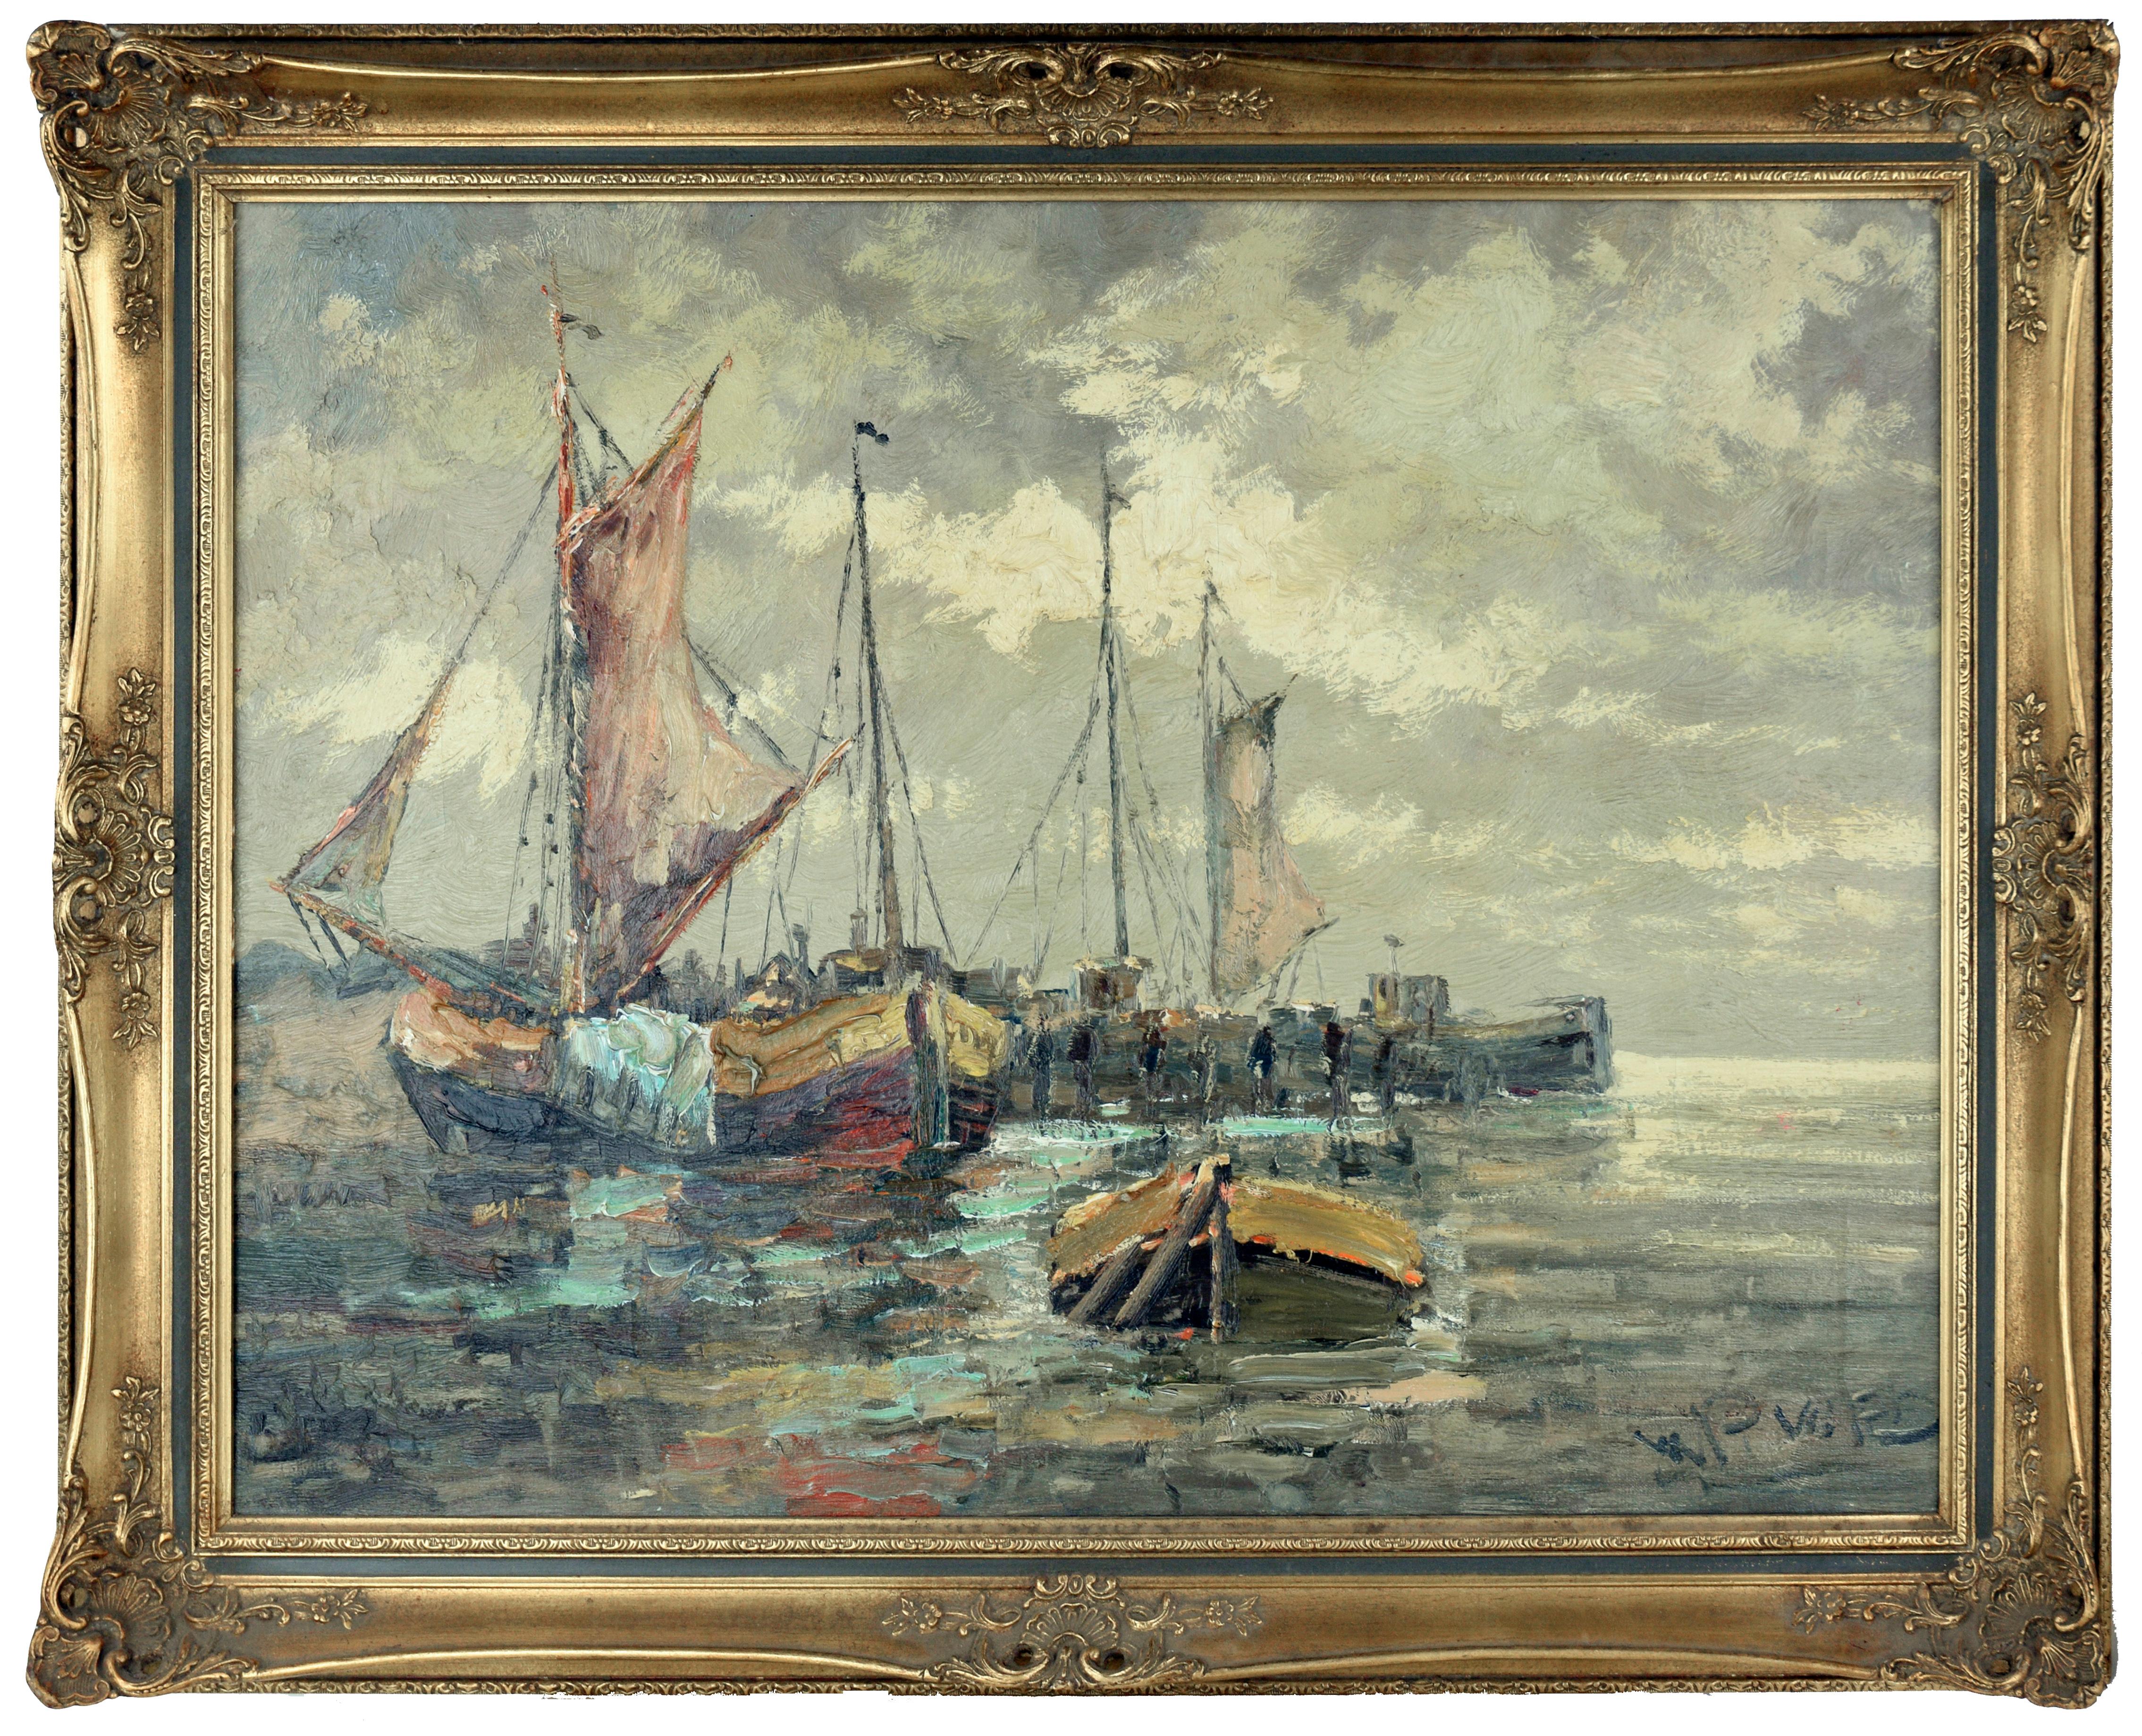 Walter Prescher van Ed  Landscape Painting - Mid Century Brittany Seascape with Fishing Boats